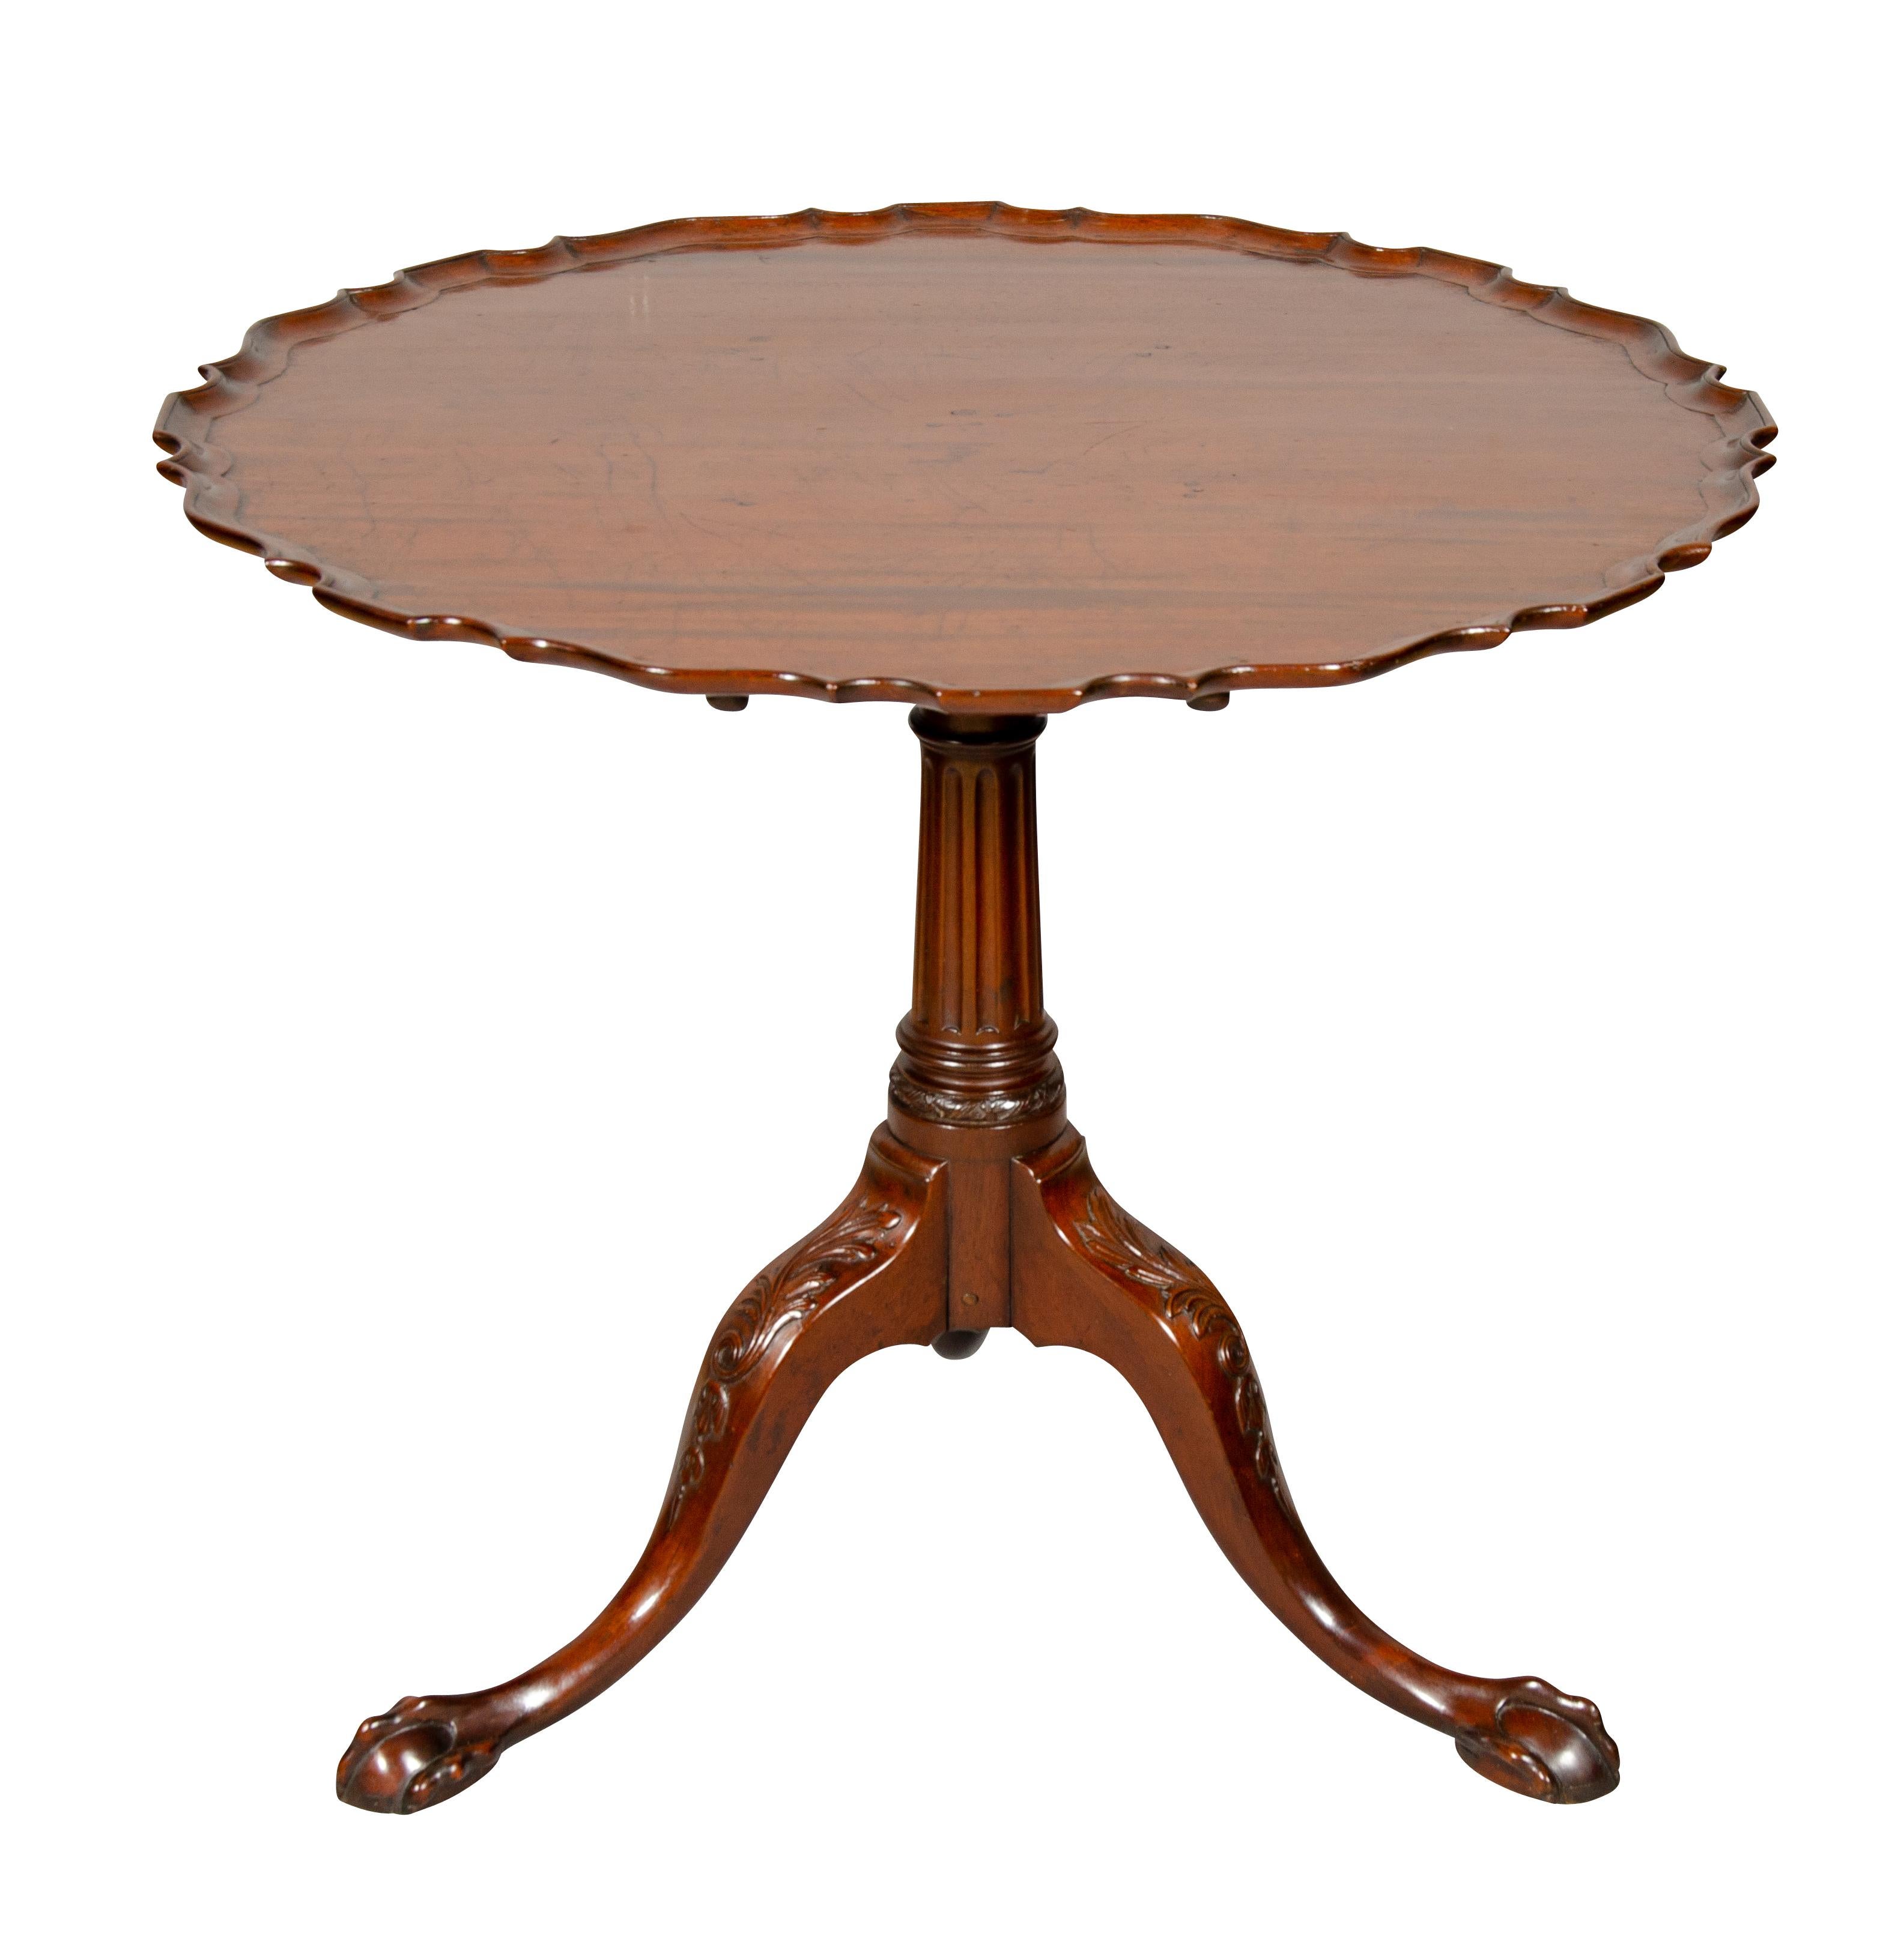 With circular hinged pie crust top on a cylindrical fluted support joining three cabriole legs with knees carved with scroll leaf ending on claw and ball feet.